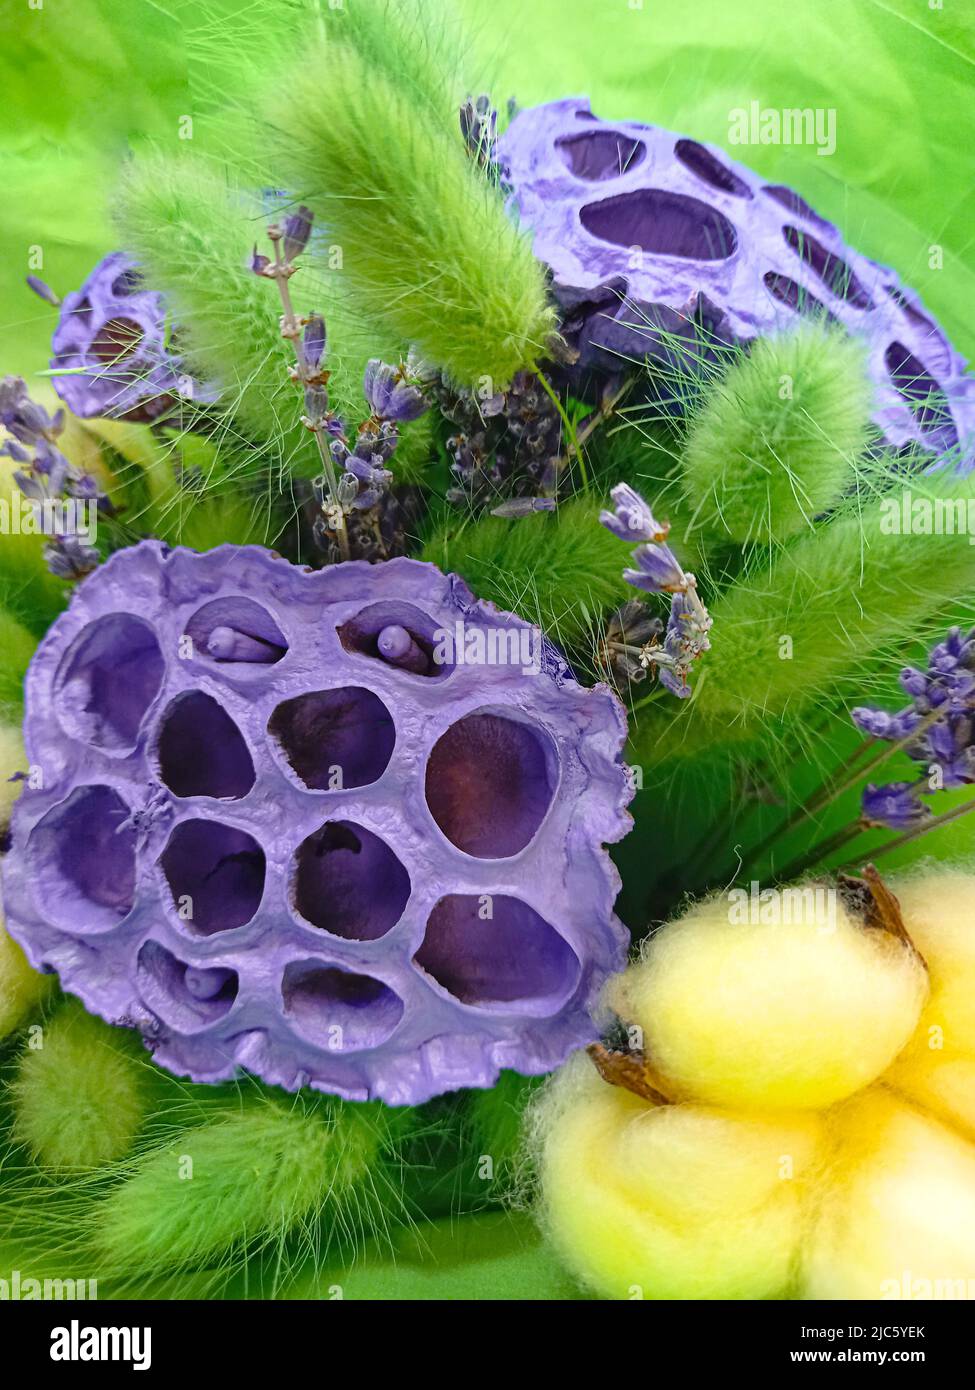 A fantastic bouquet of dried flowers. Lotus seeds. Cotton flowers. Hare tail. Purple light green and yellow. For congratulations. Stock Photo